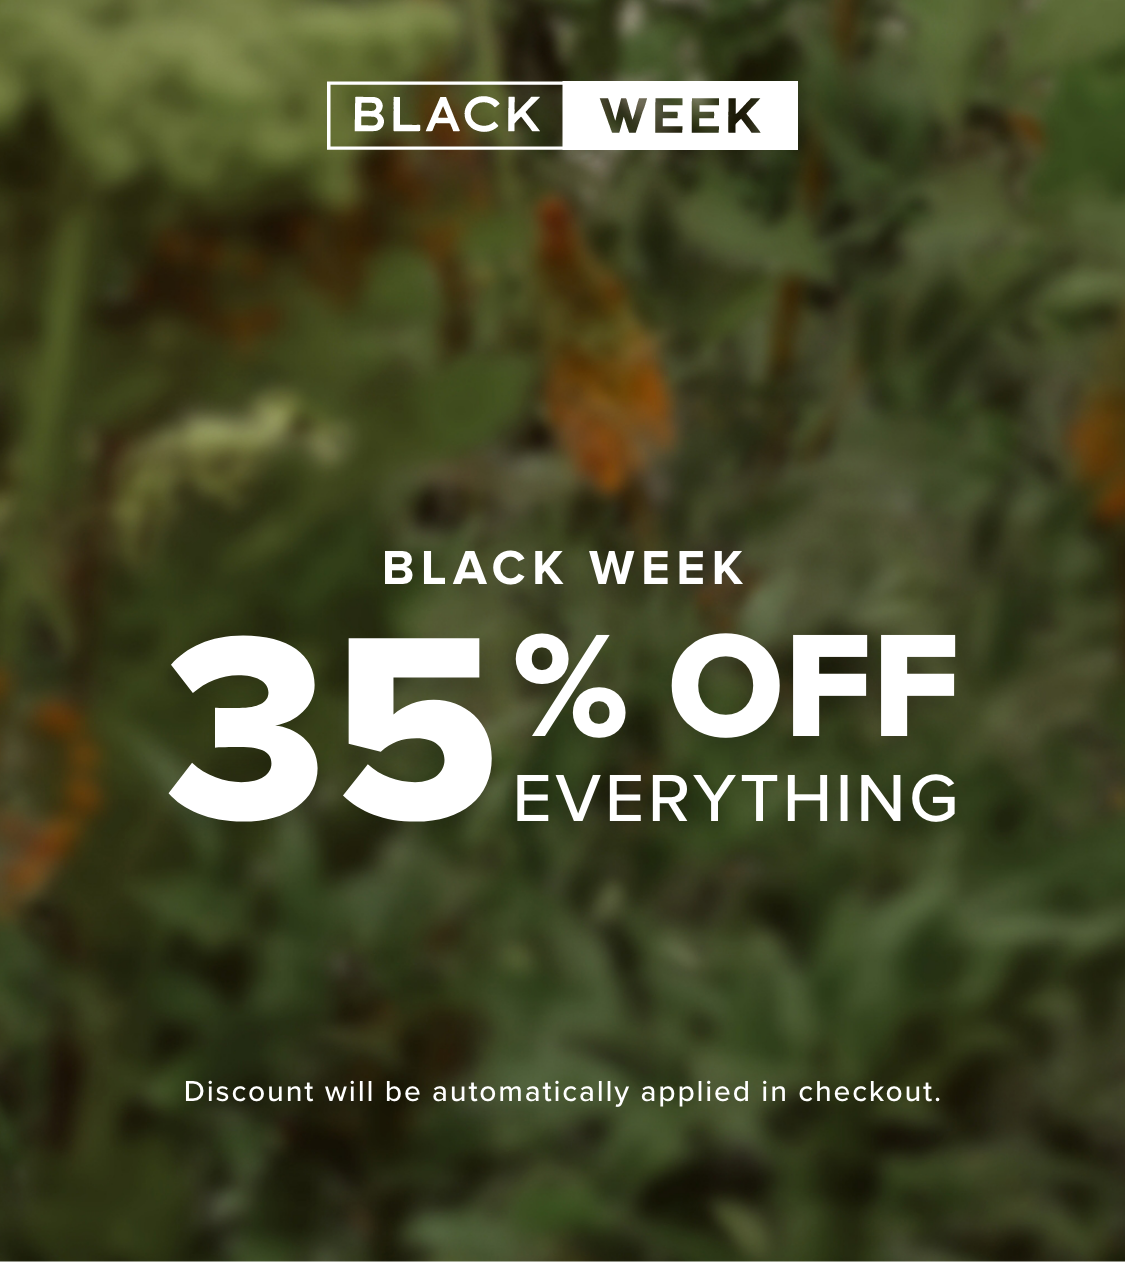 CWN @ WEEK BLACK WEEK 35%0FF EVERYTHING Discount will be automatically applied in checkout. 